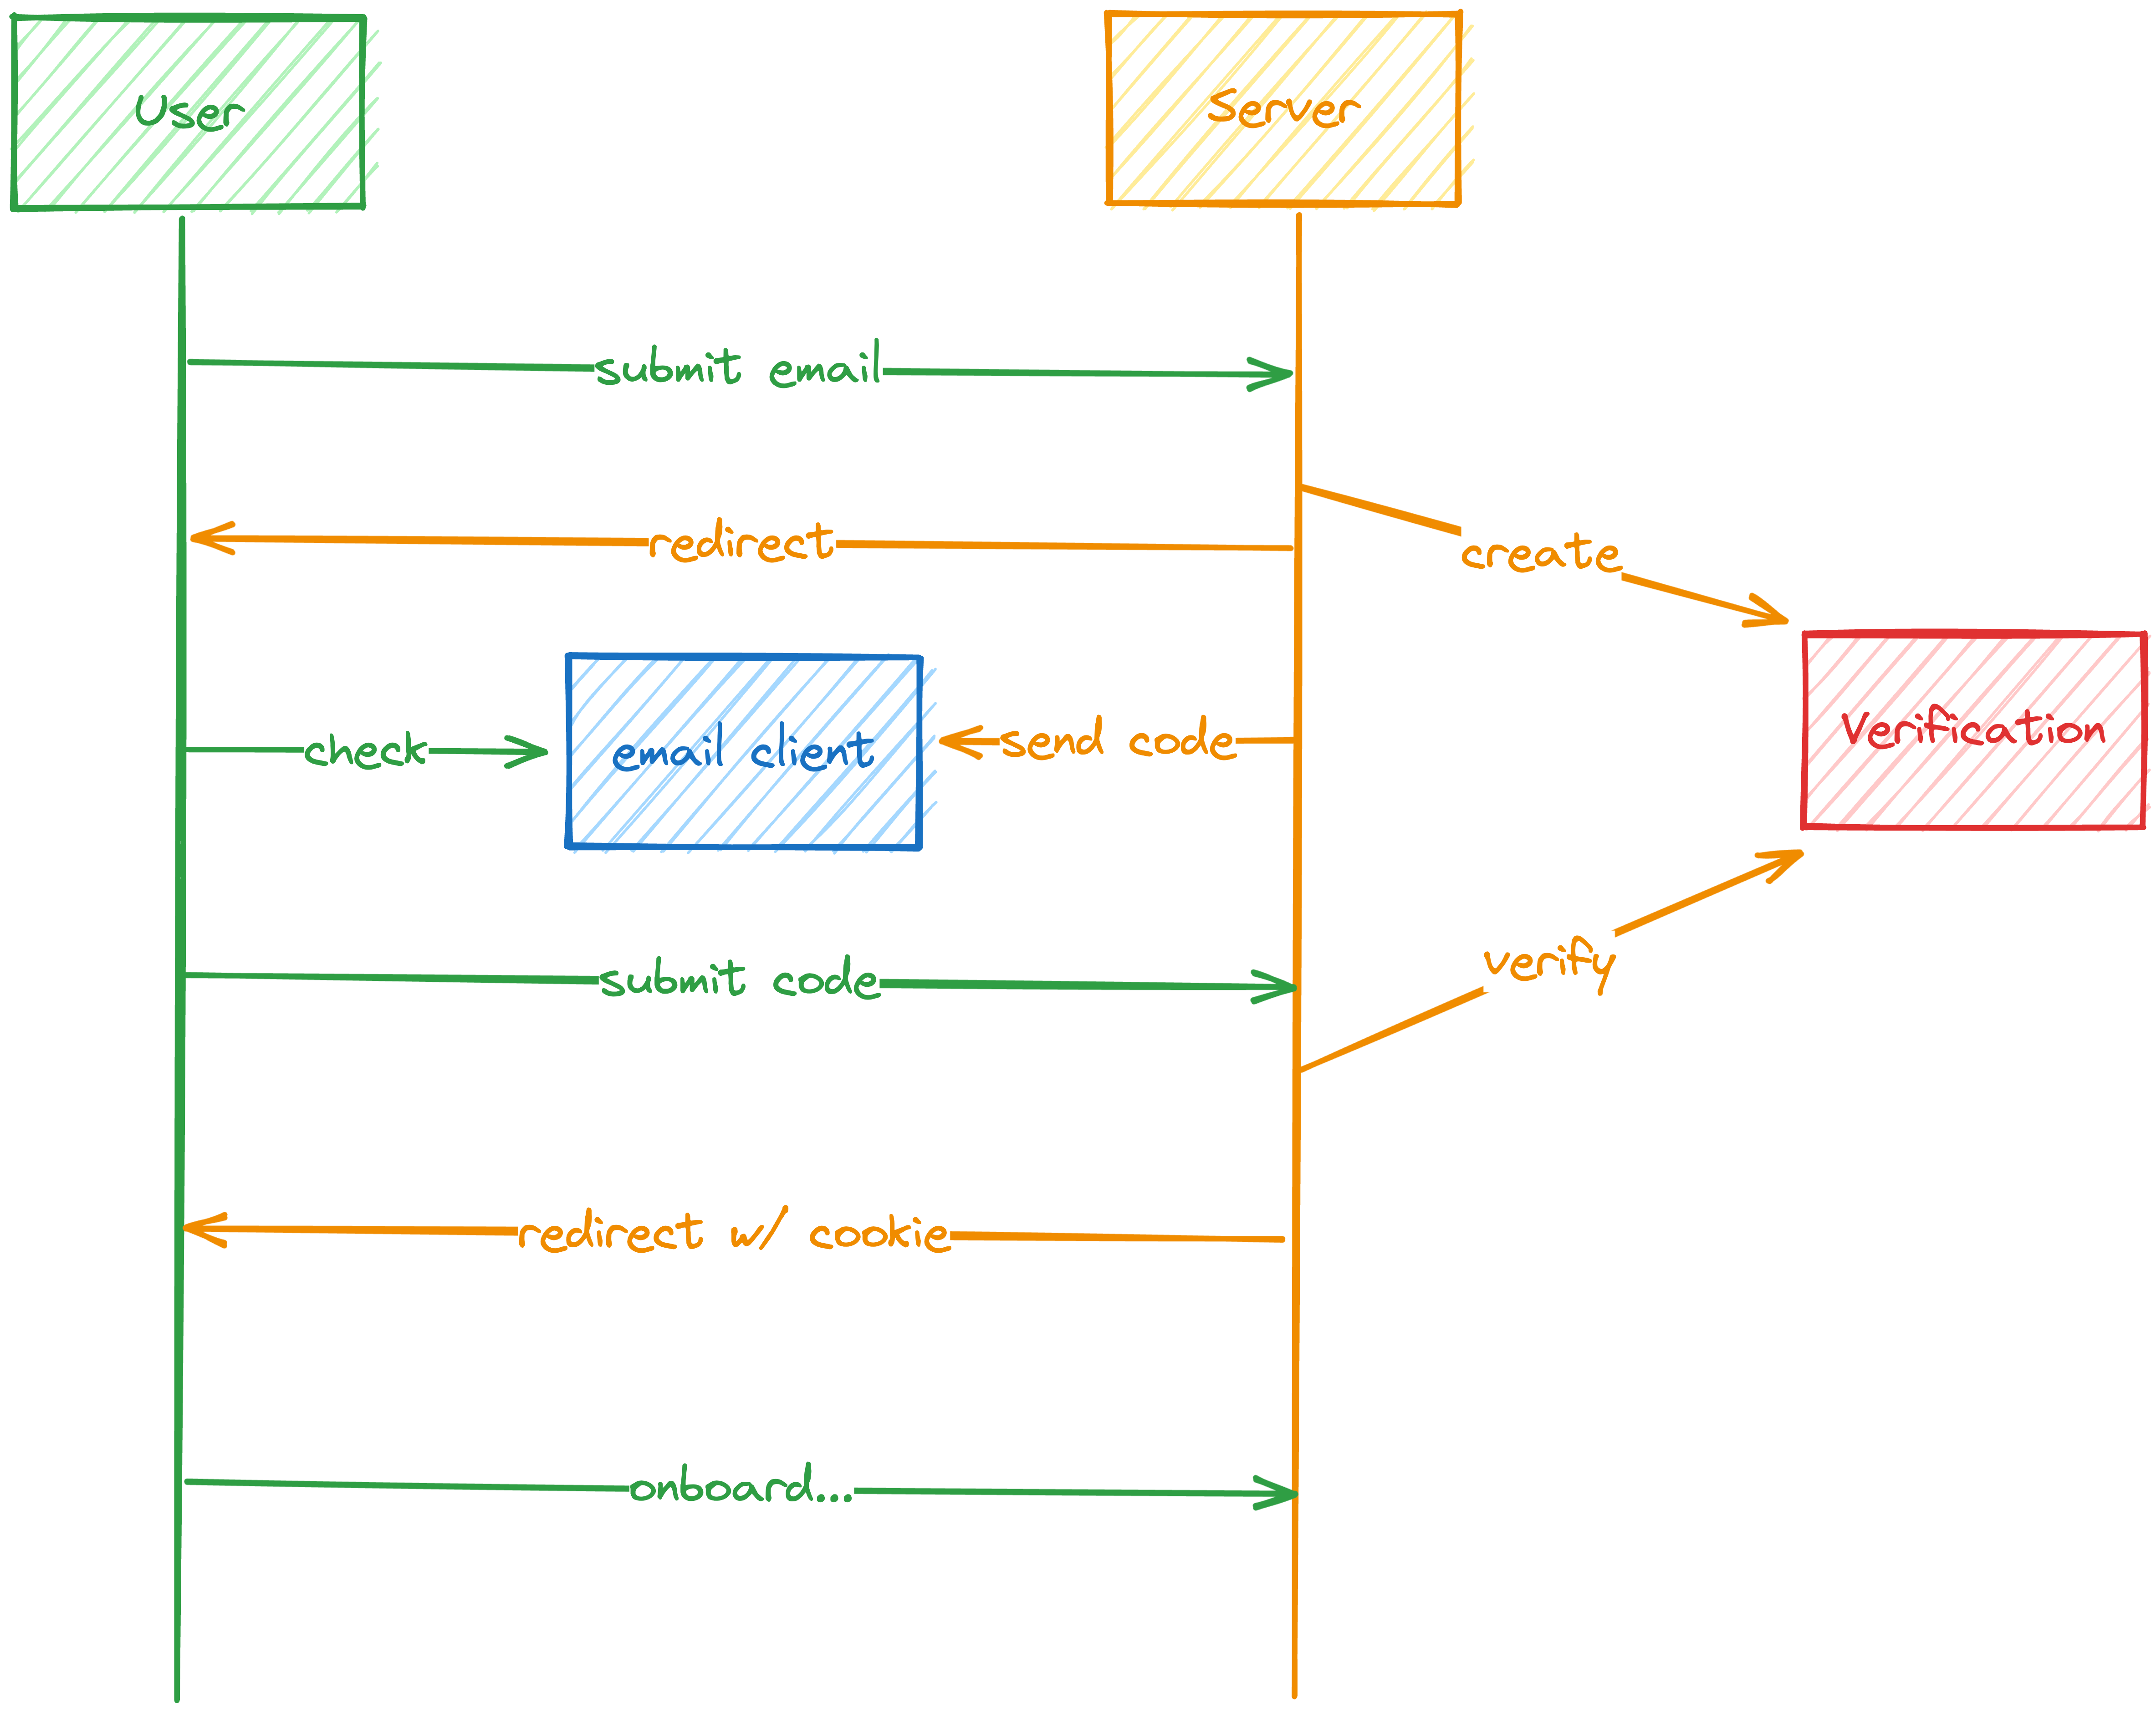 auth flow showing communication between a user and server described below